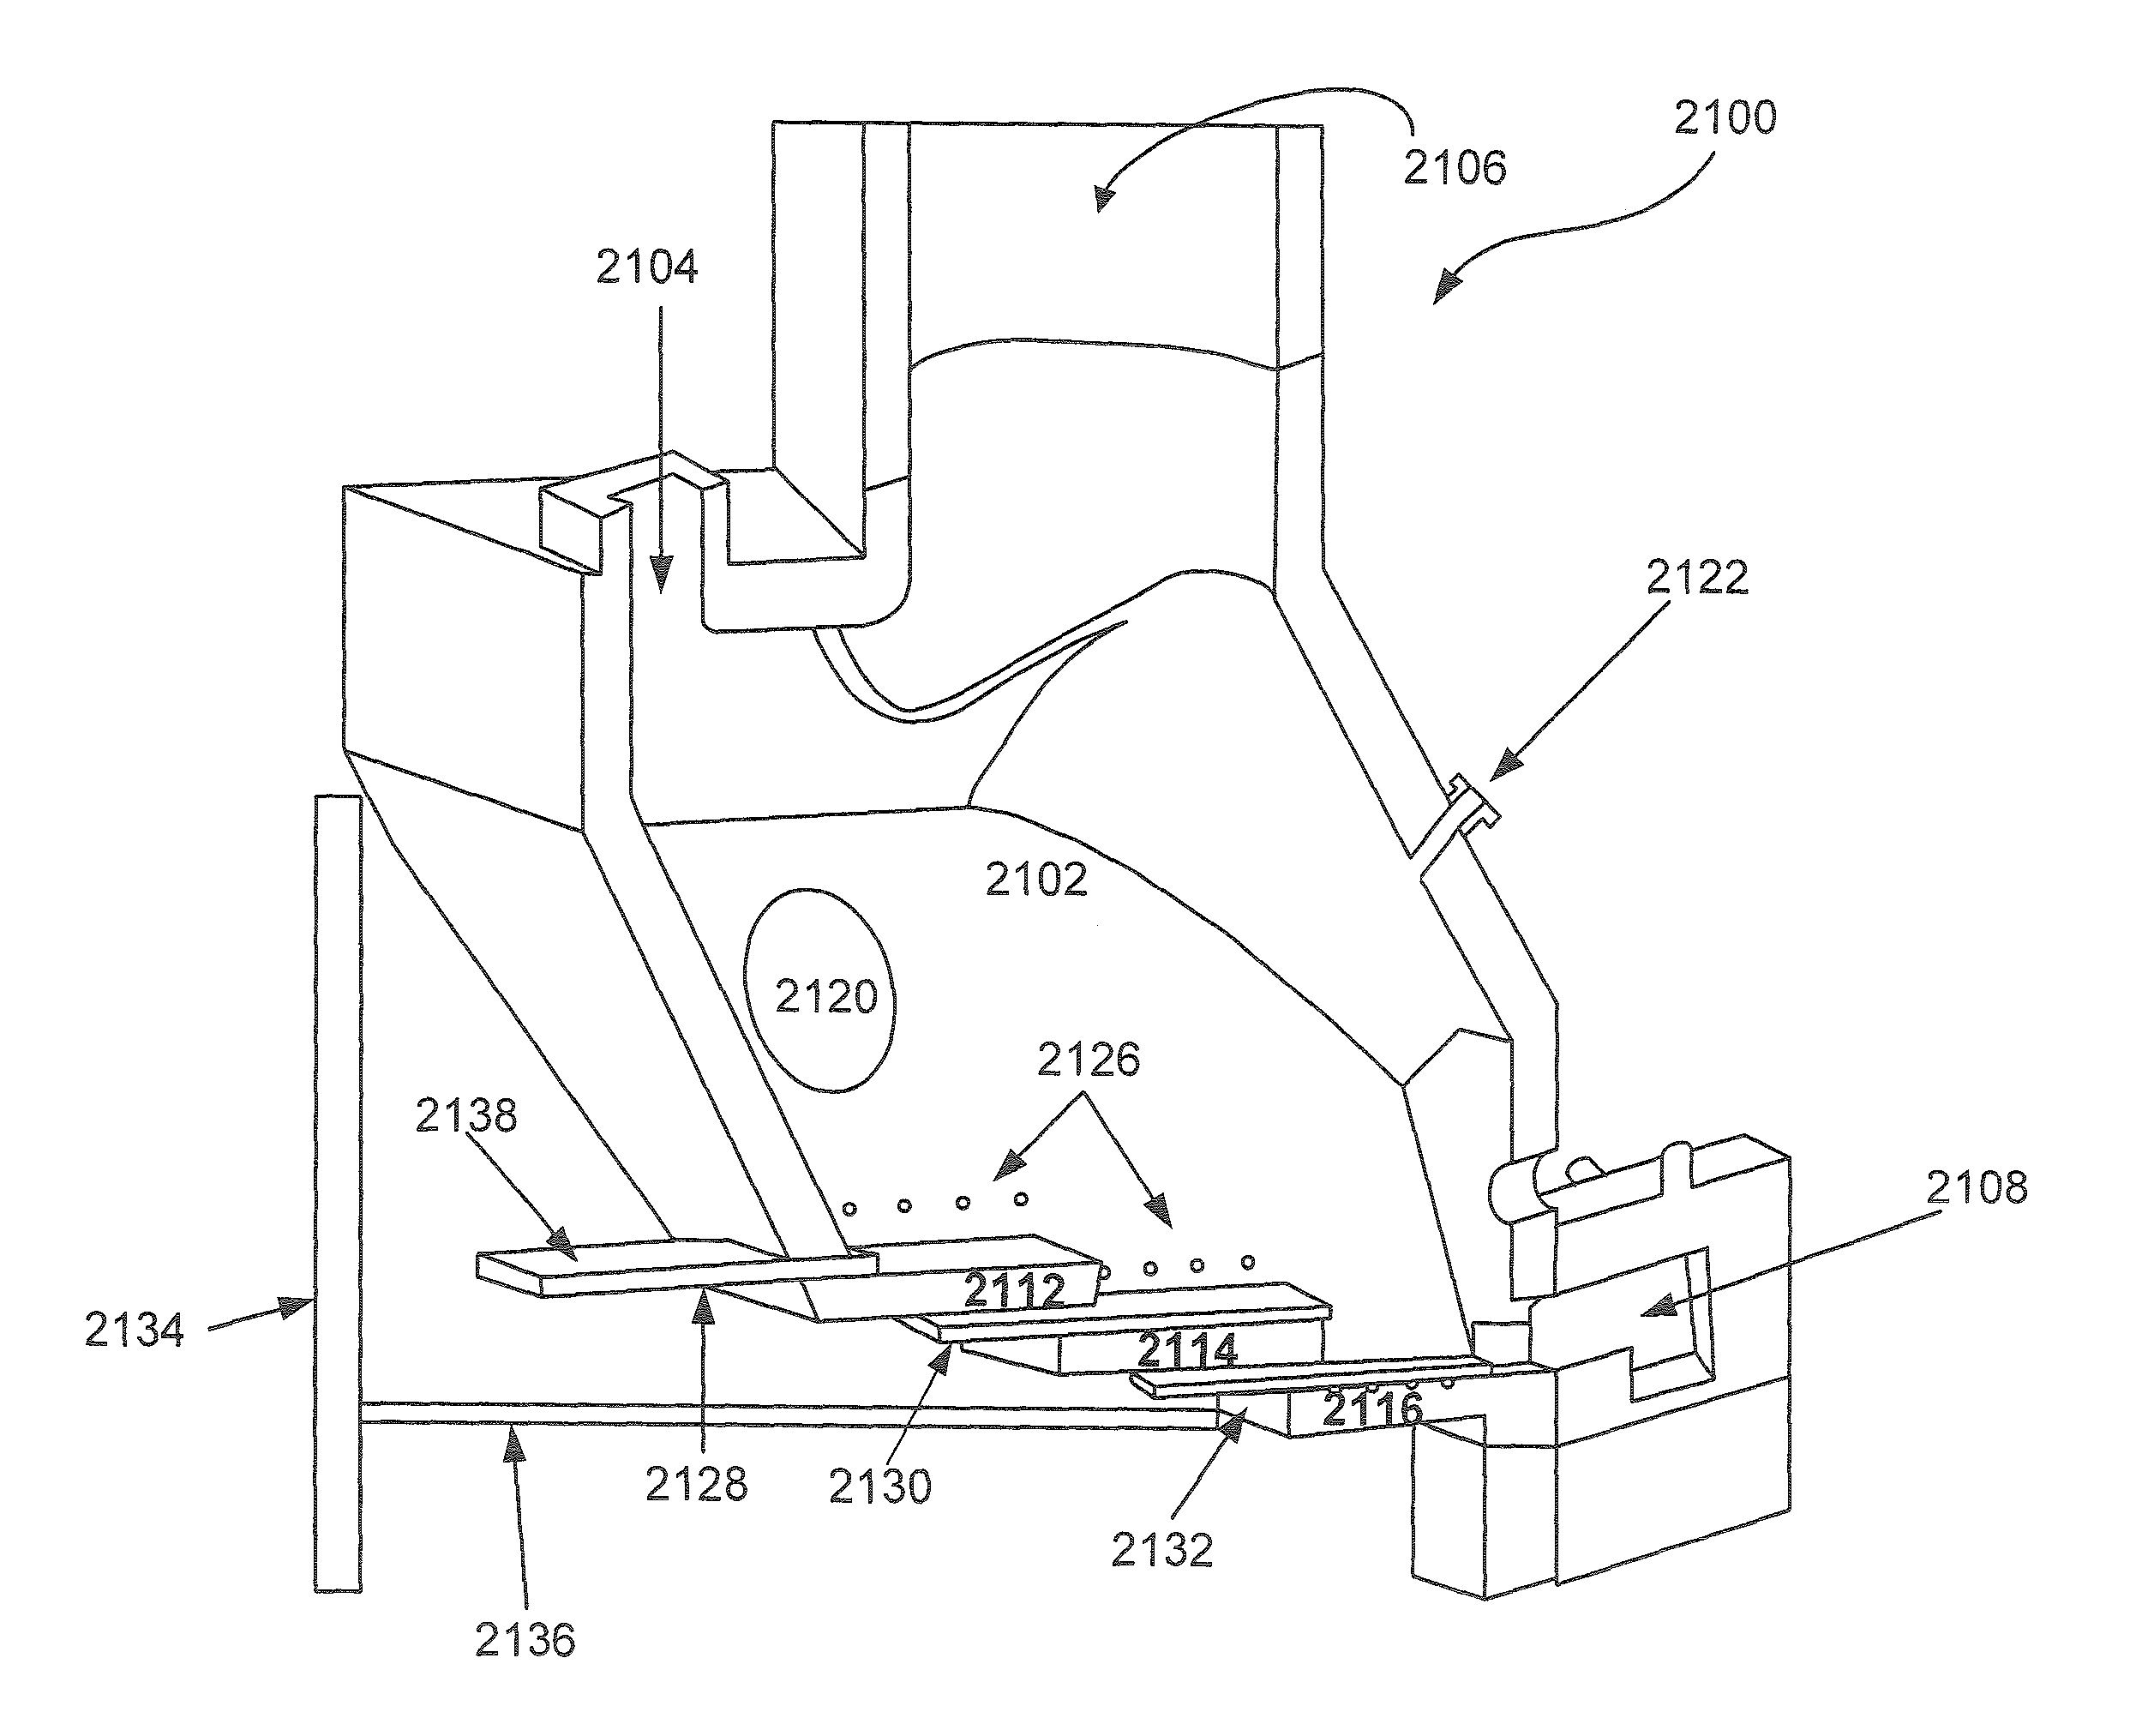 Horizontally-oriented gasifier with lateral transfer system